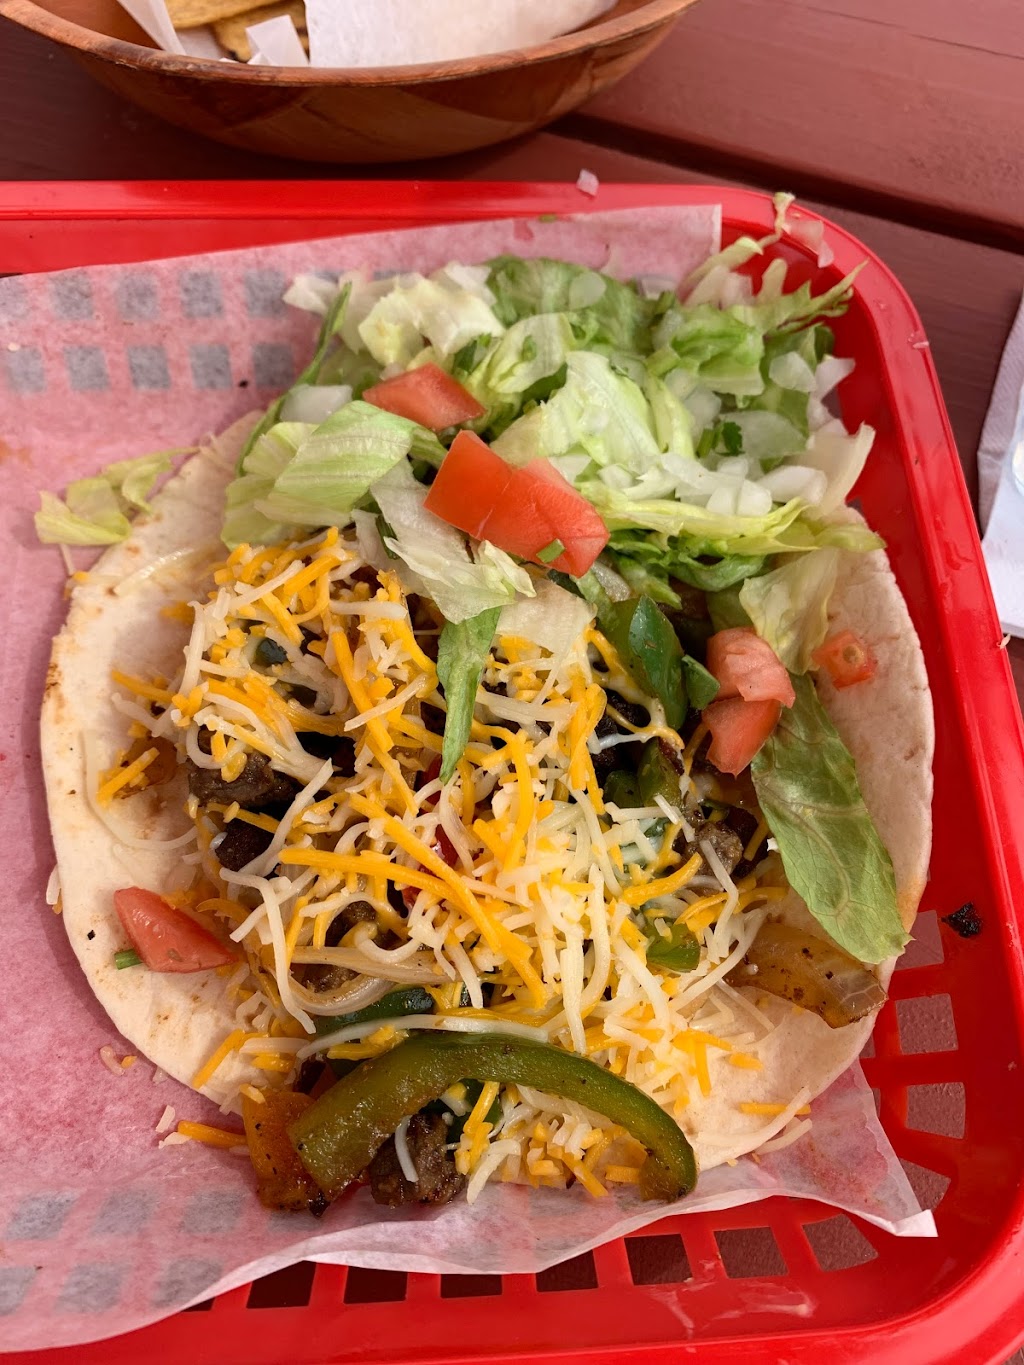 JJ Brothers Tacos and Market | 41 Russell St A, Hadley, MA 01035 | Phone: (413) 387-0582